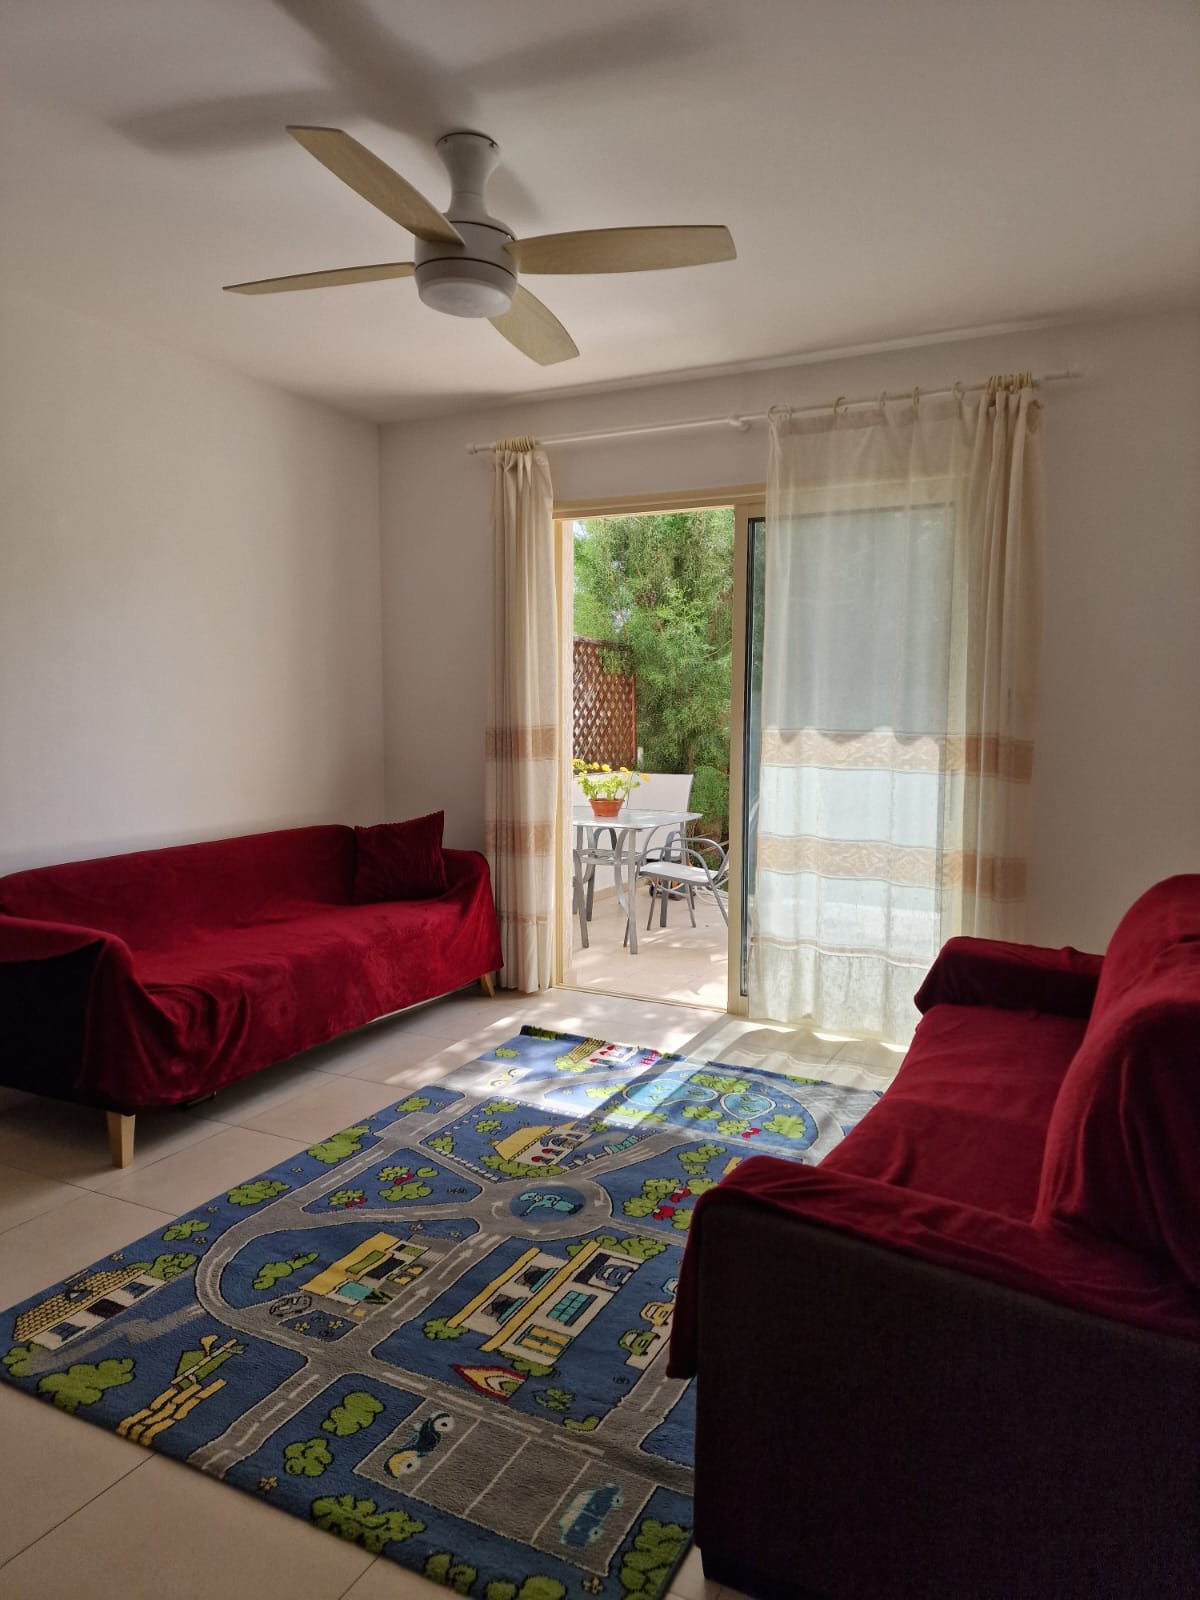 Property for Rent: House (Maisonette) in Universal, Paphos for Rent | Key Realtor Cyprus